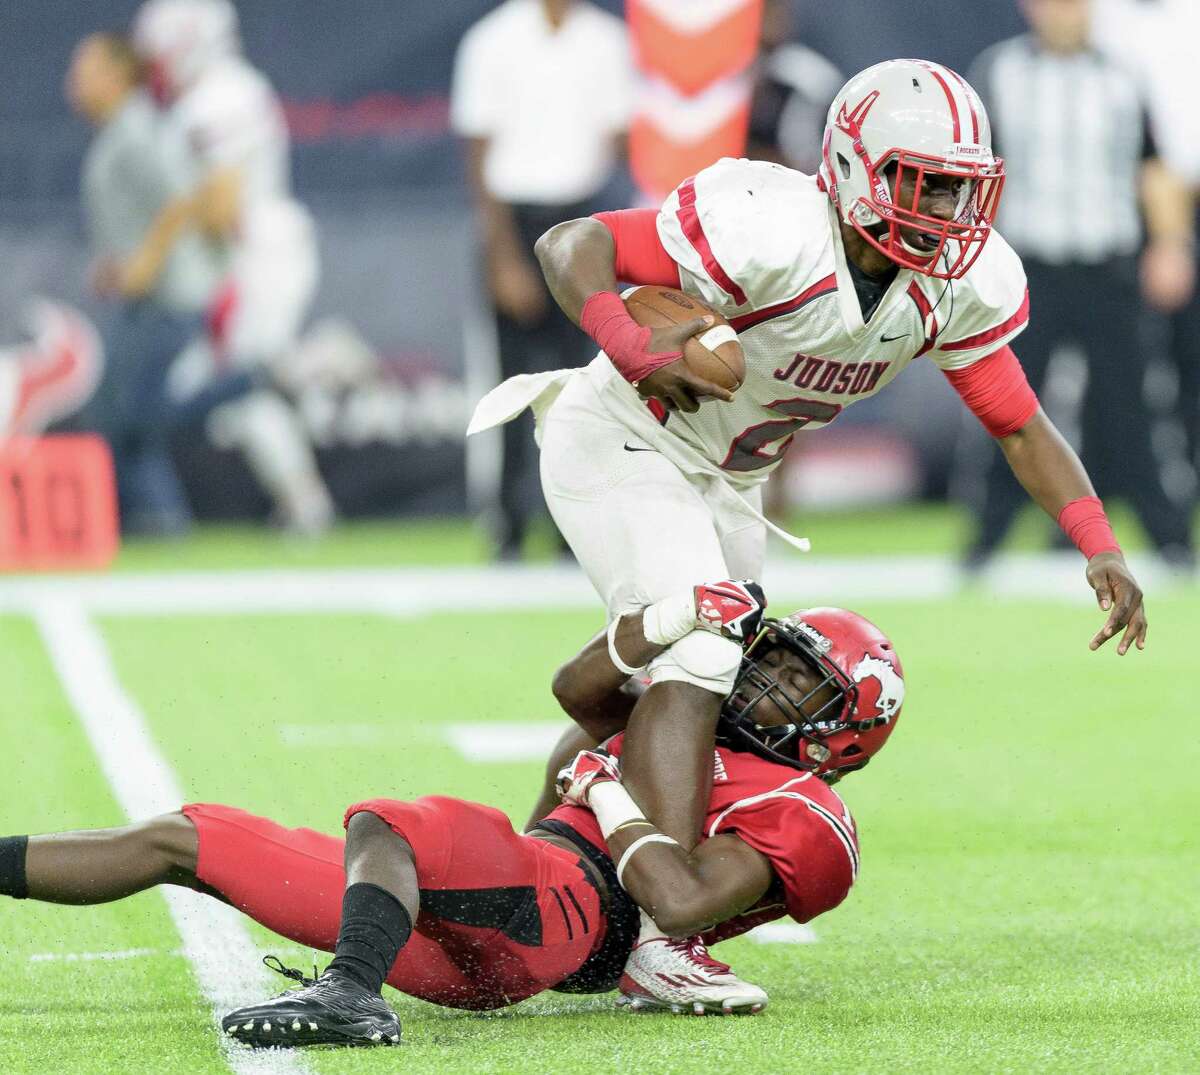 North Shore's Jaylen Thomas hangs on to sack Converse Judson's Julon Williams in the second half of Saturday's game at NRG Stadium.